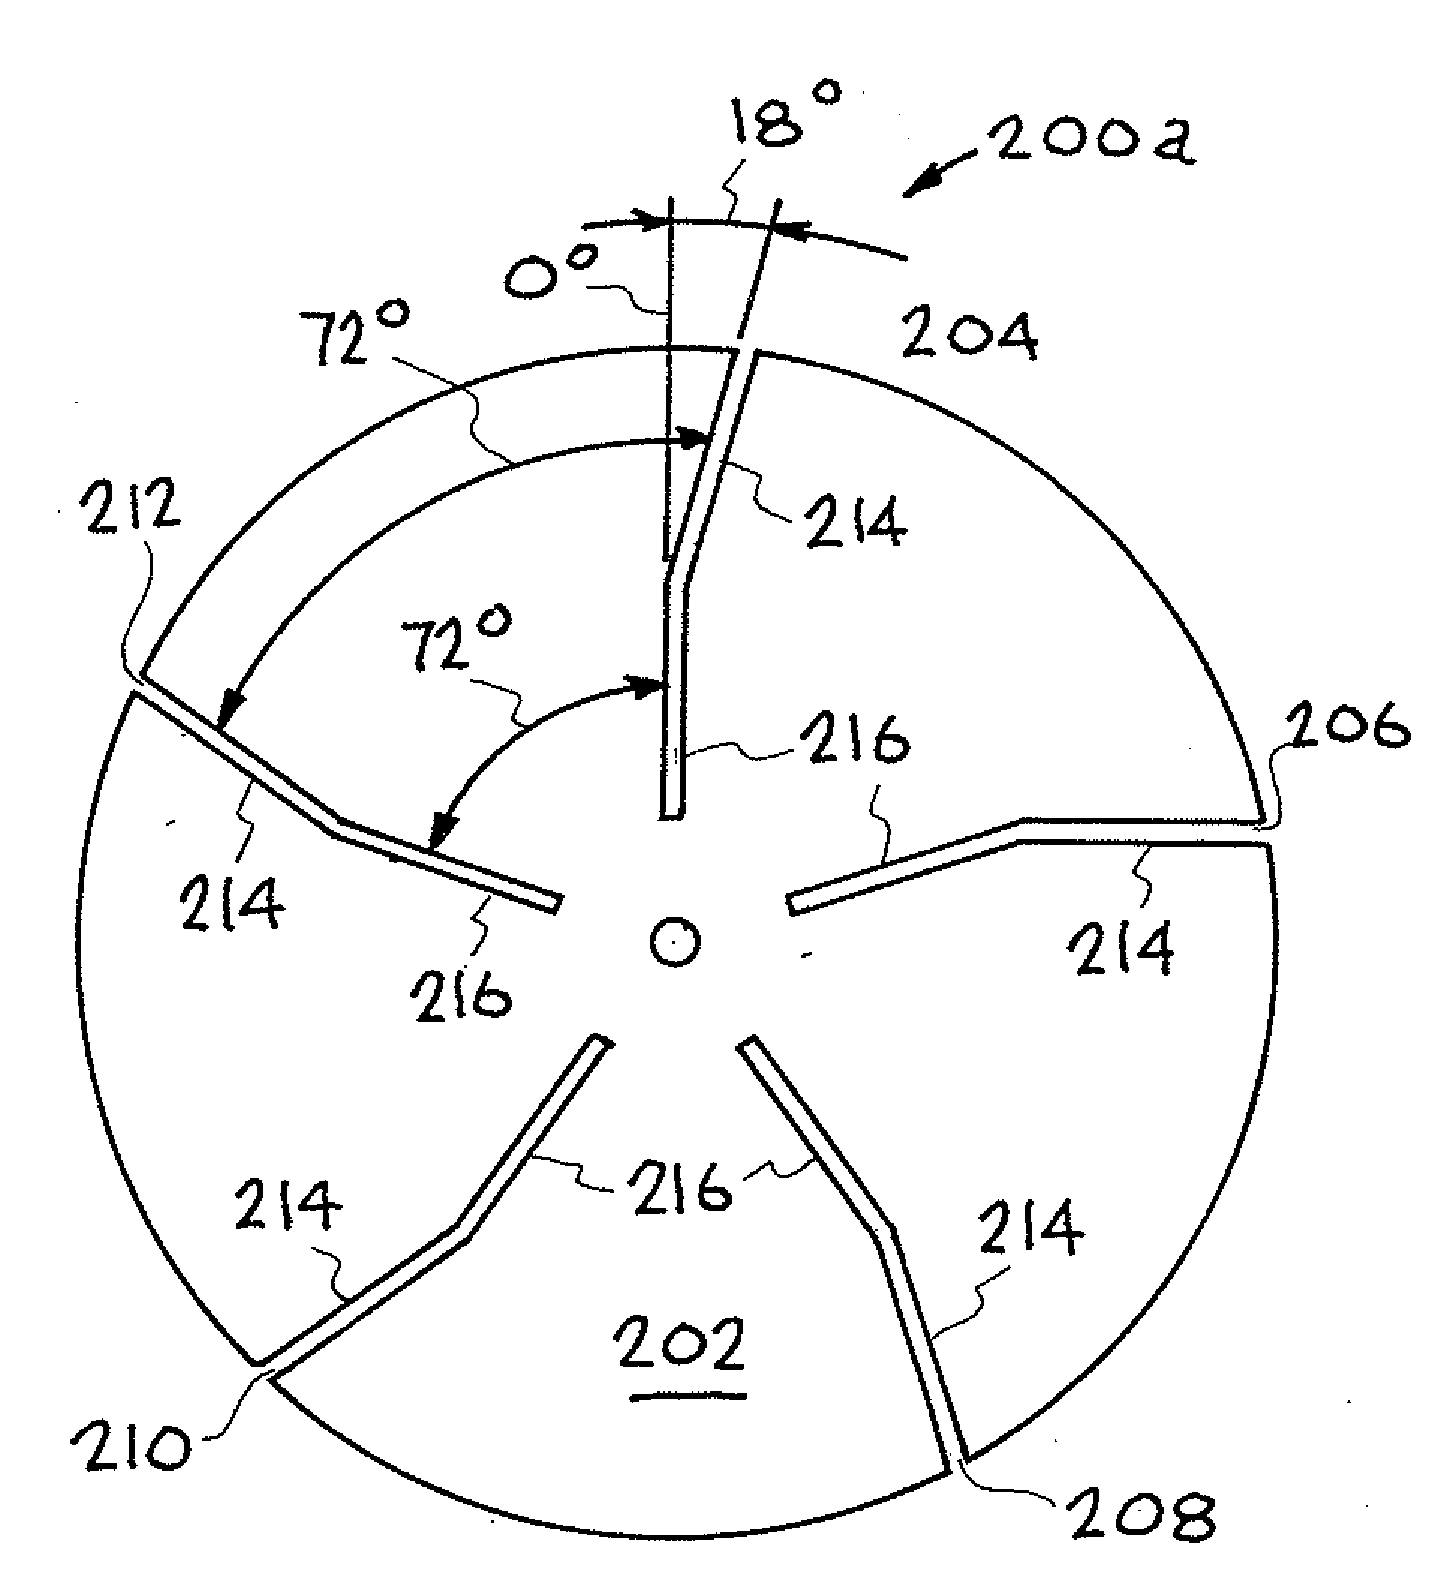 Slit Disk for Modified Faraday Cup Diagnostic for Determing Power Density of Electron and Ion Beams